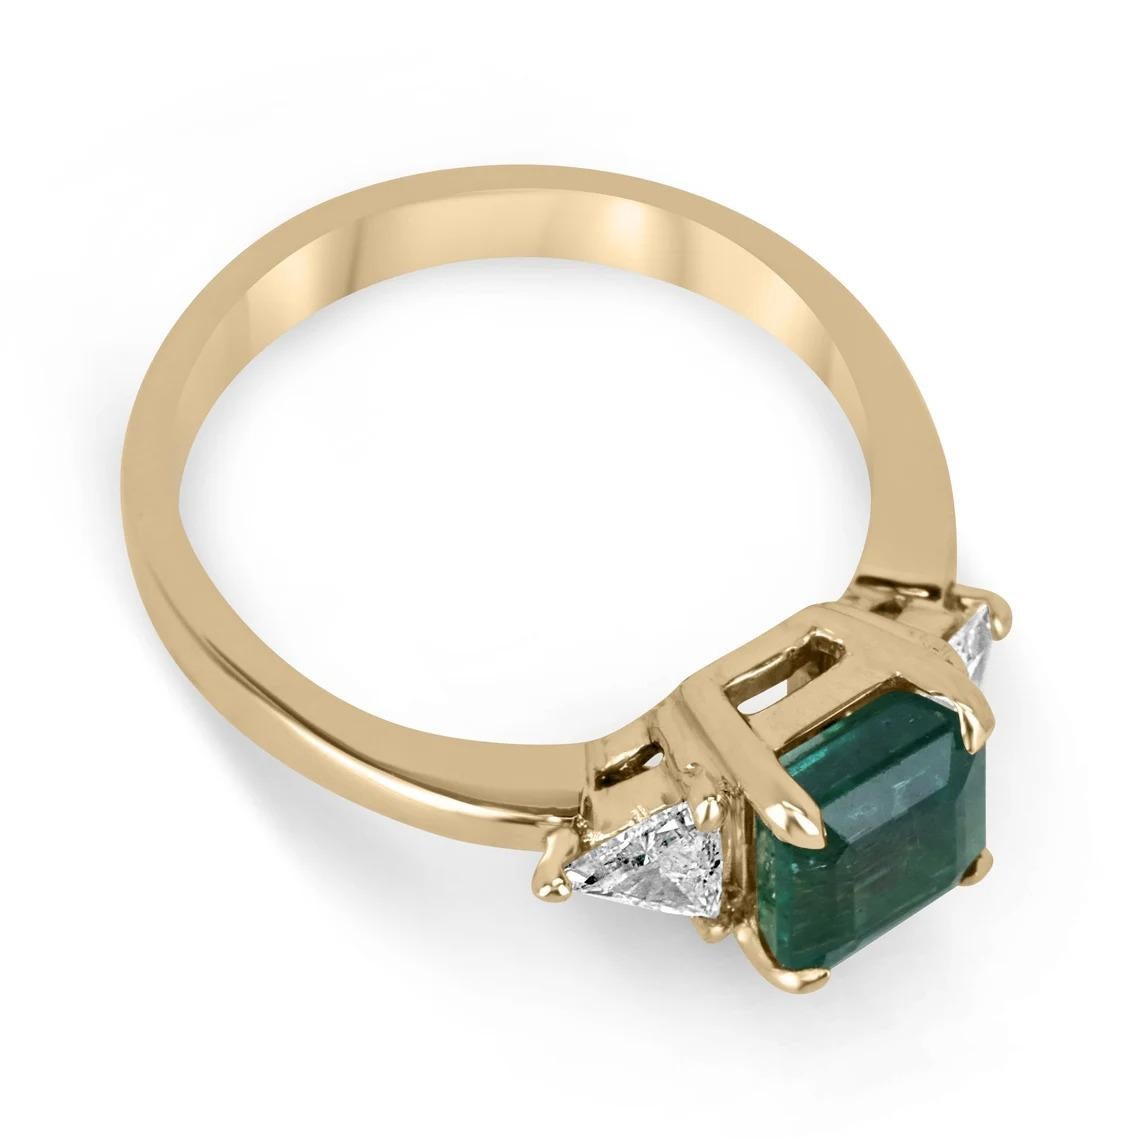 A stunning emerald and diamond three-stone ring. This masterpiece features a remarkable natural, Asscher cut emerald from the origin of Zambia. The gemstone displays a lush green color with very good clarity and luster. Natural inclusions within the